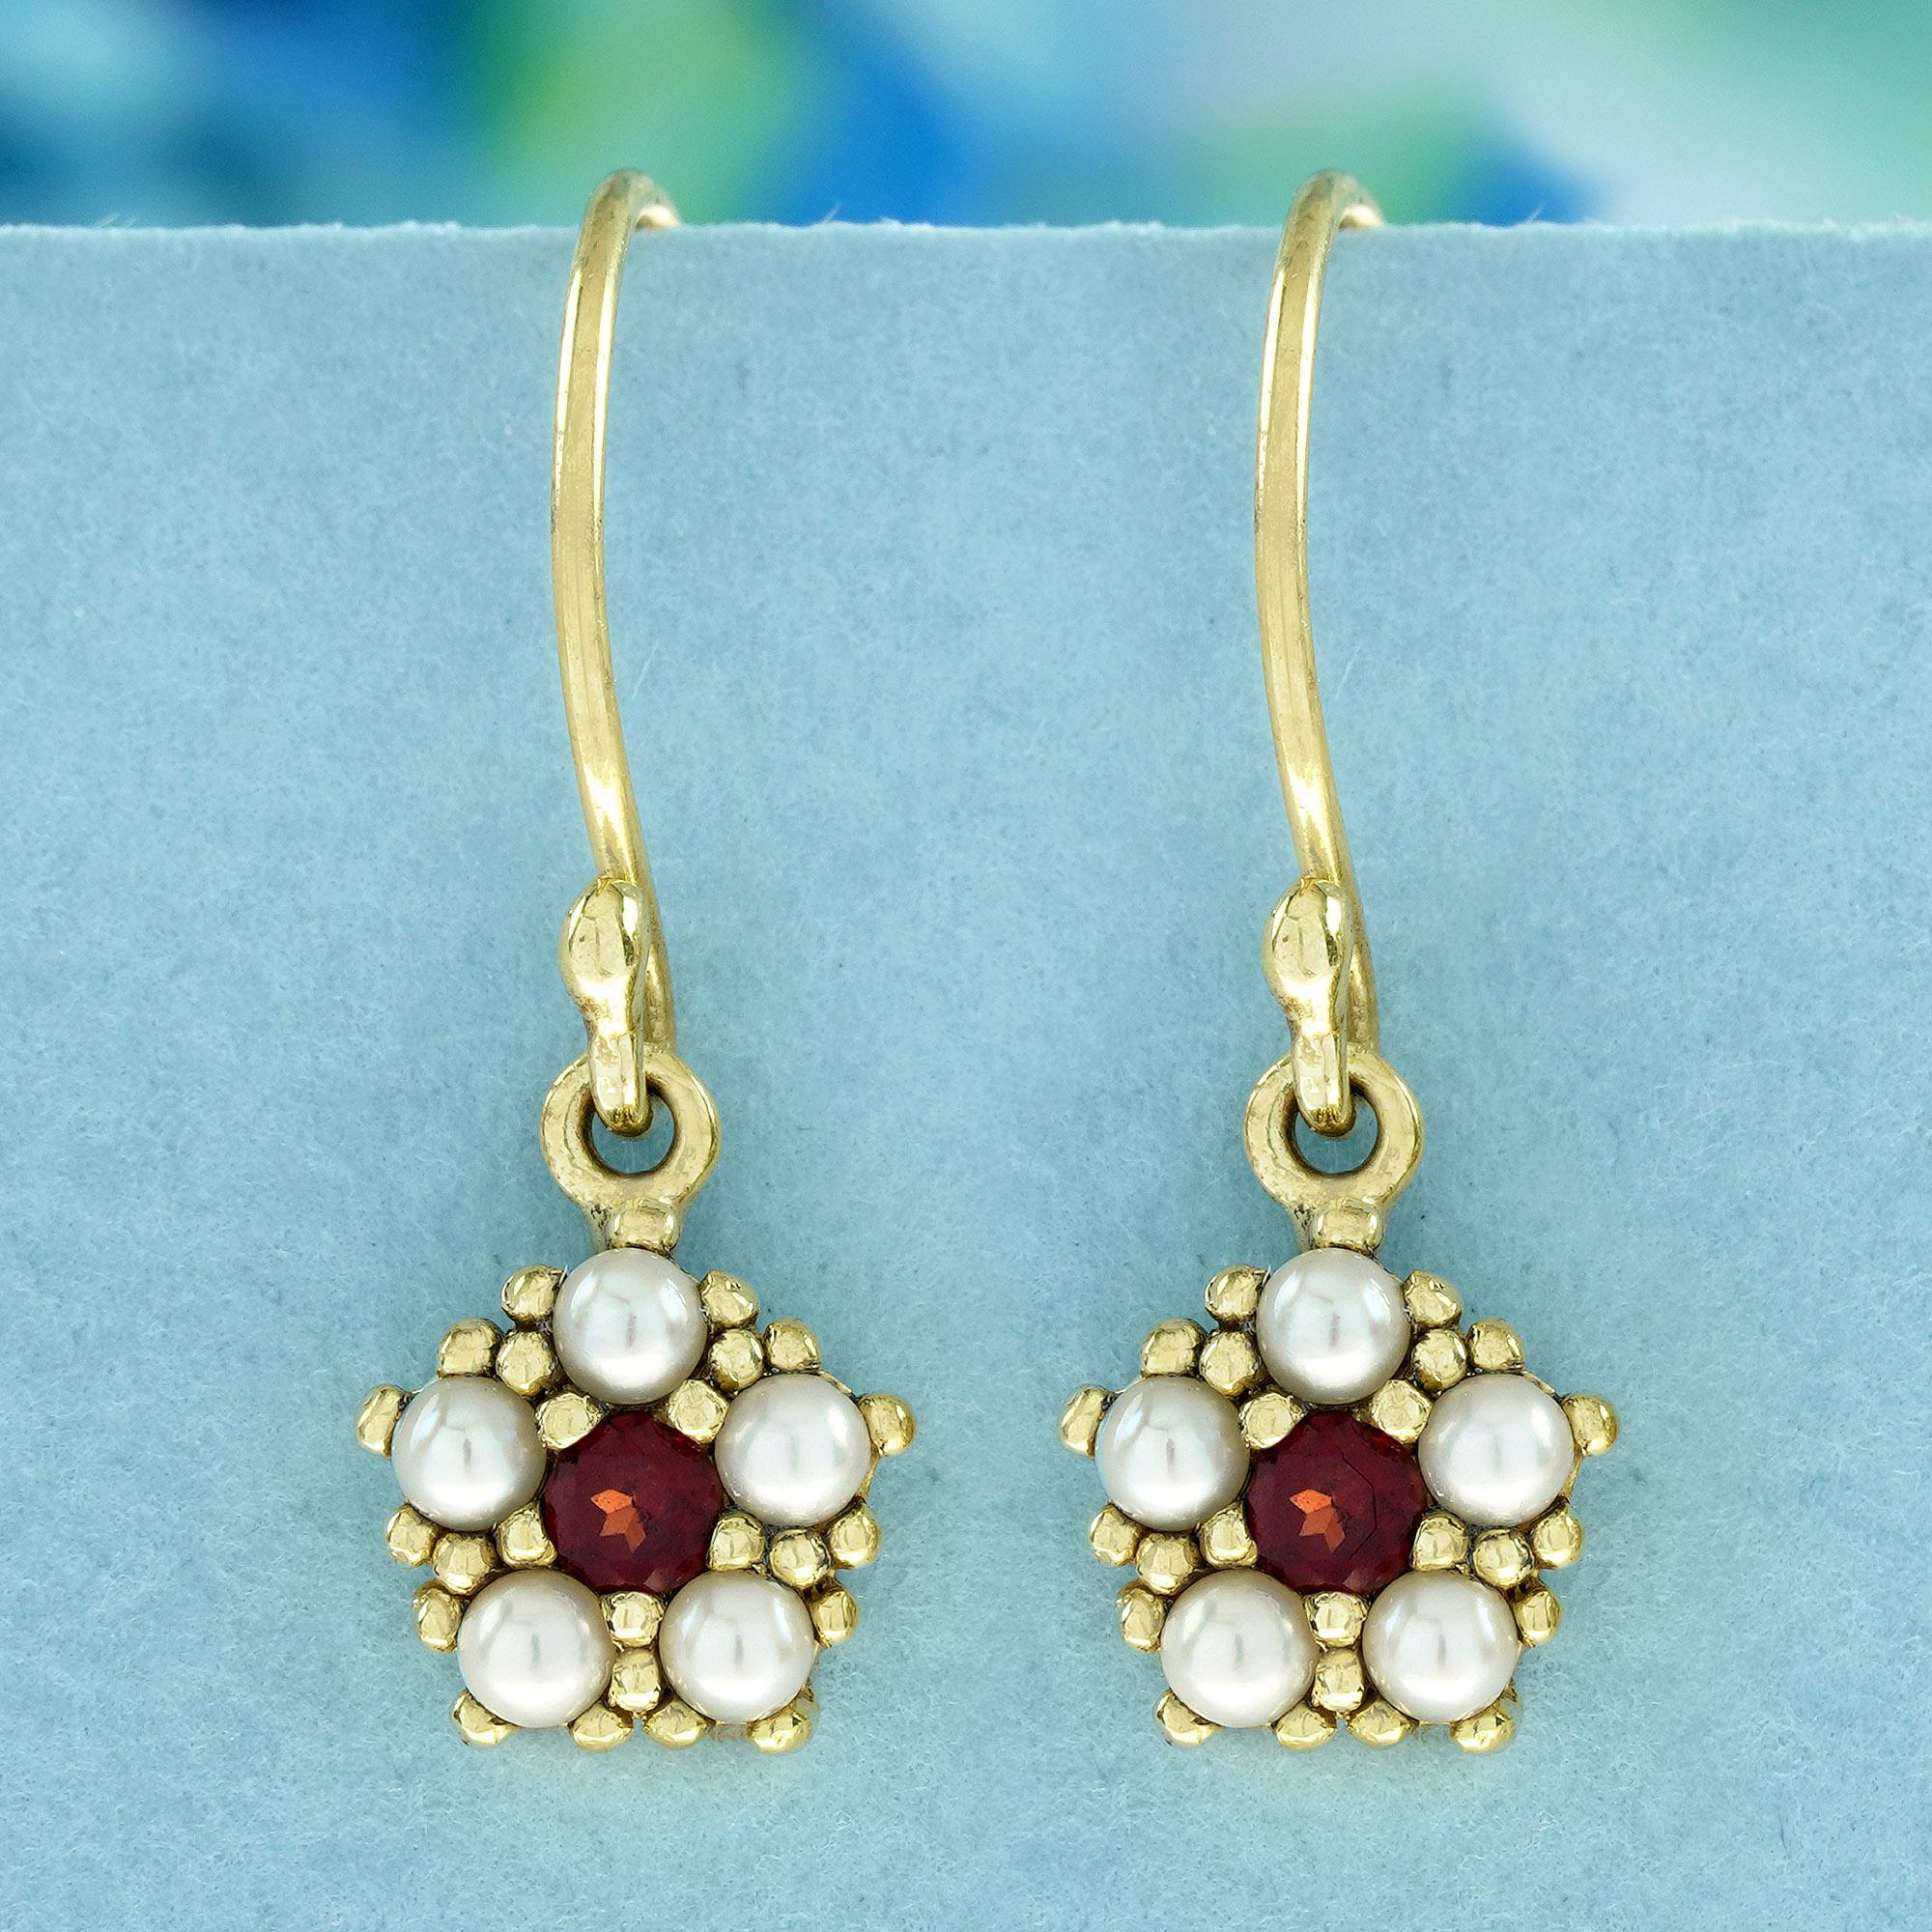 Crafted in gleaming yellow gold, these earrings captivate with a unique pentagonal floral design. A single, deep red garnet, symbolizing passion and vitality, takes center stage. Delicate milgrain detailing adds a touch of vintage elegance.